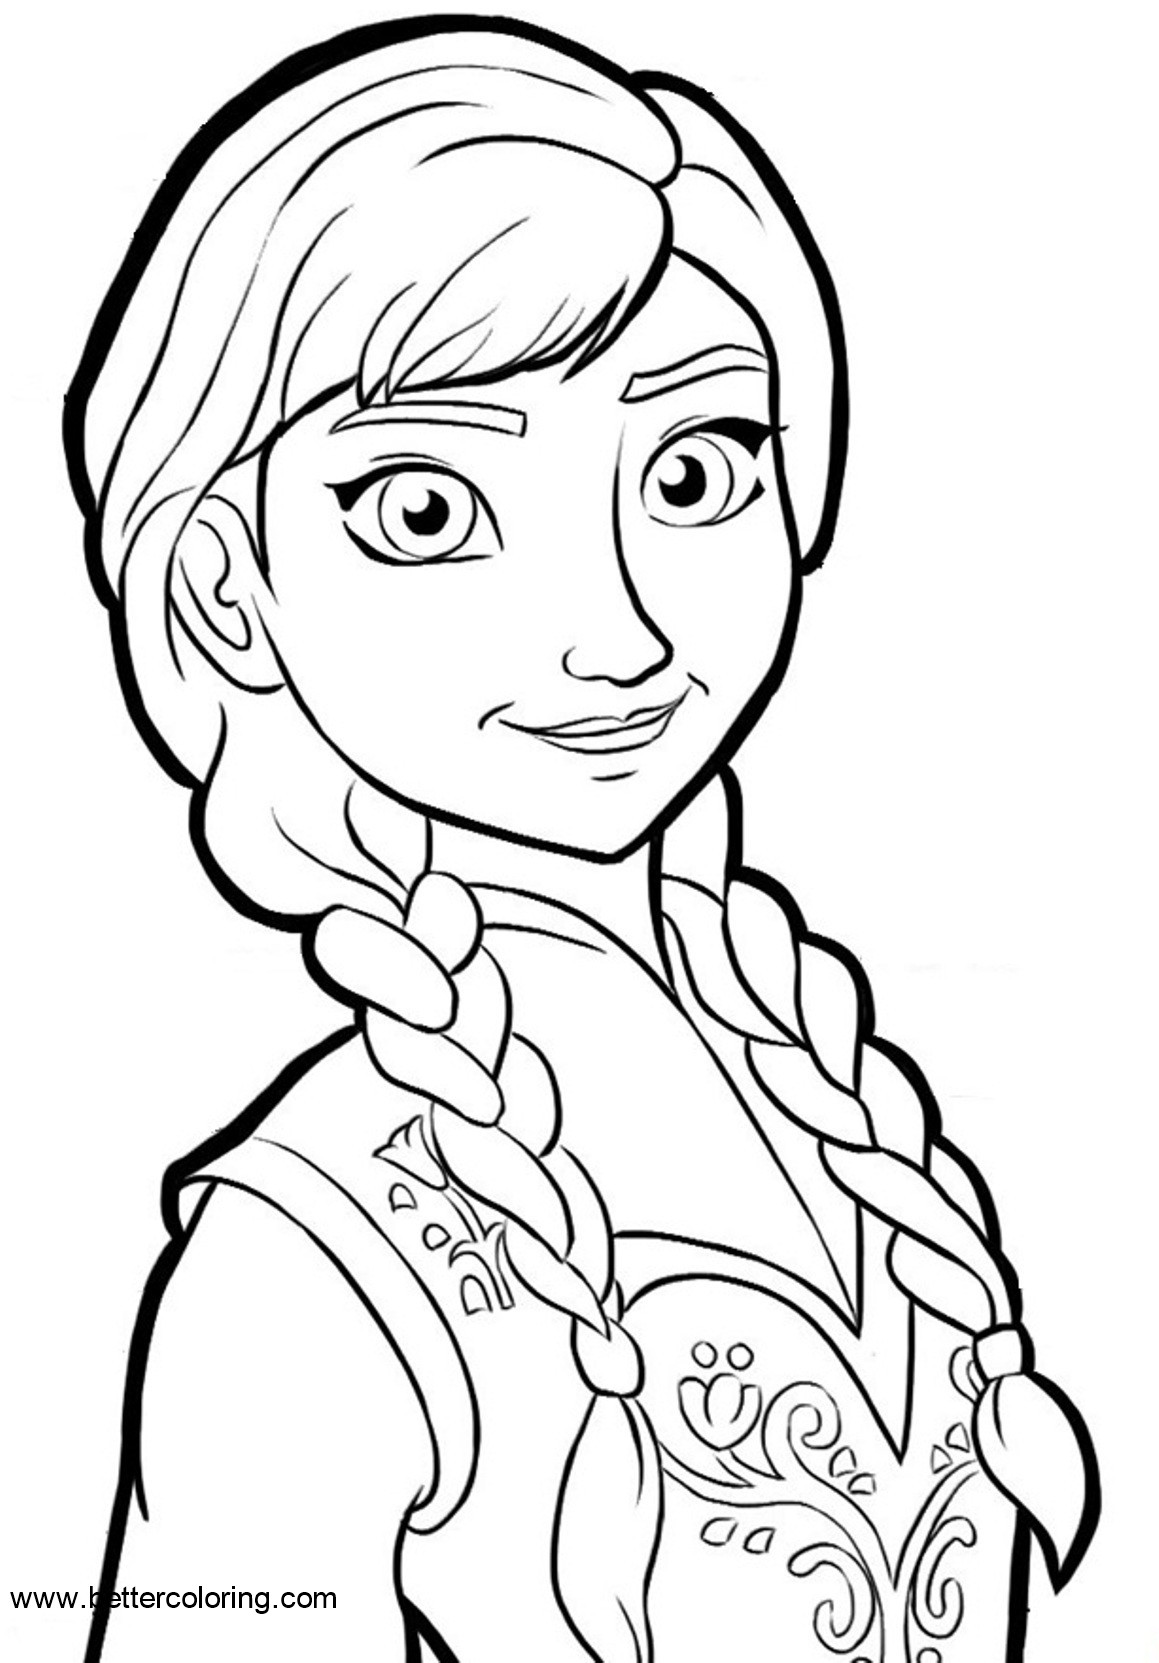 Coloring Pages : Coloring Princess Elsa And Annantable Frozen.